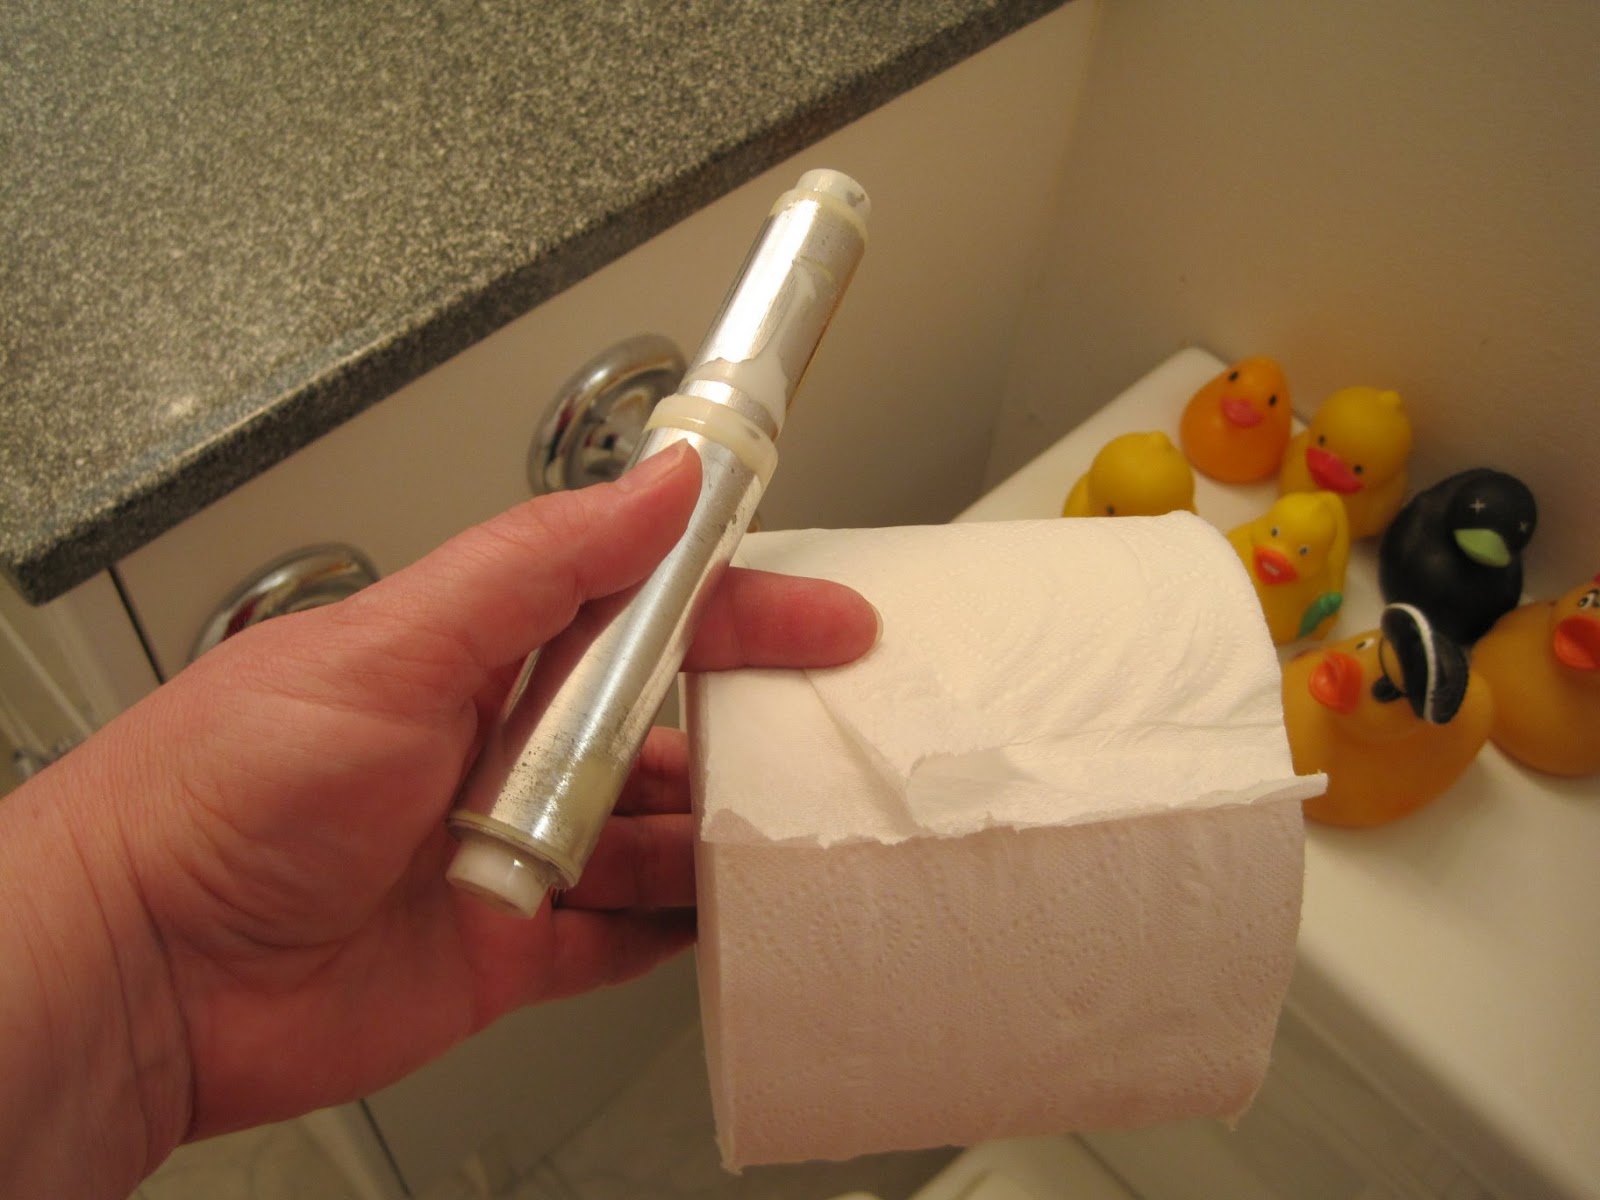 Remedial Adulthood How To Replace A Toilet Paper Roll.